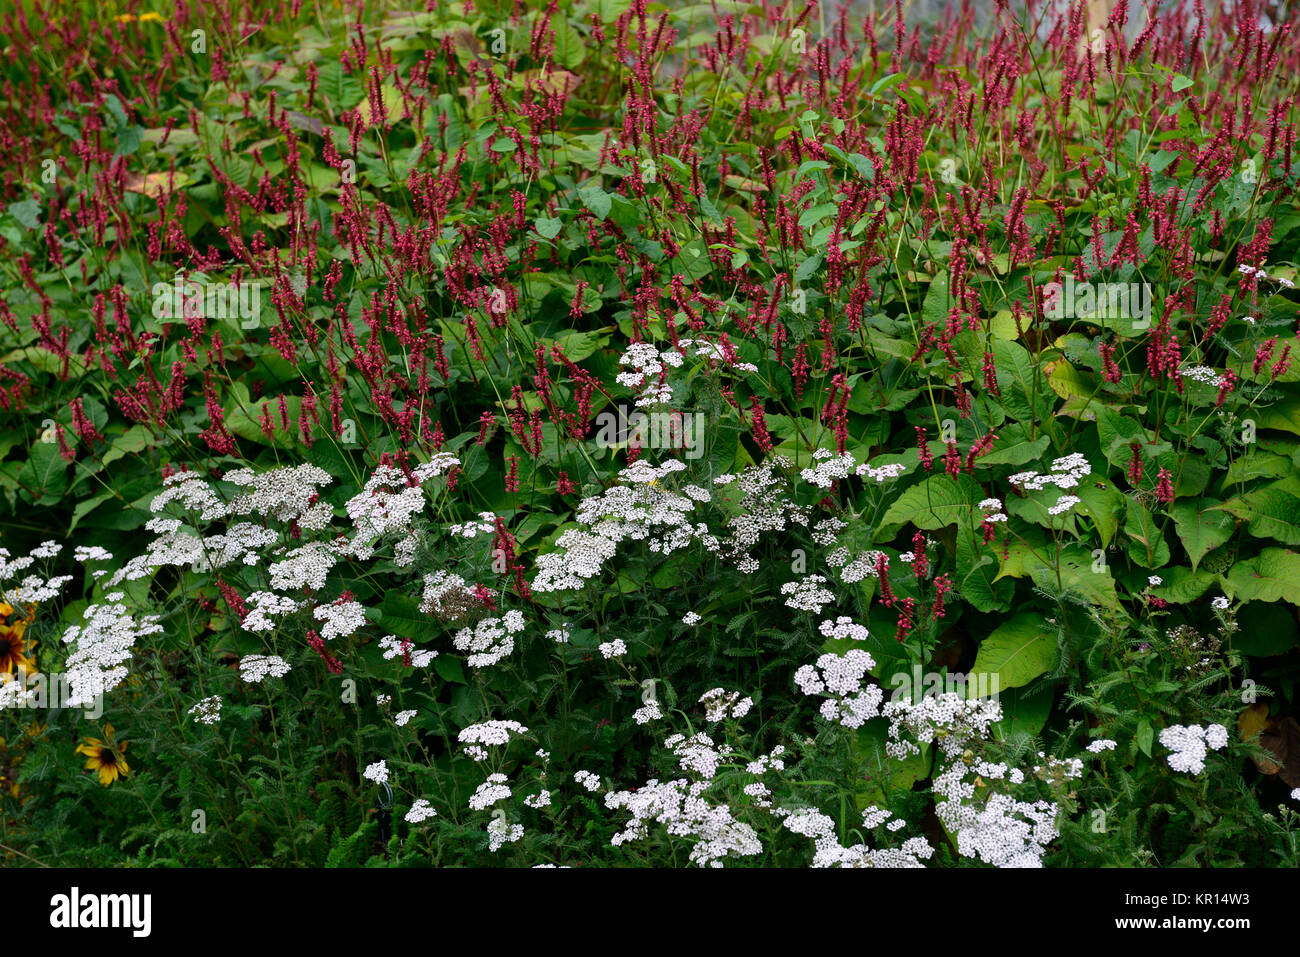 Persicaria amplexicaulis Red Baron,Achillea millefolium,yarrow,white,red,flower,flowers,flowering,mix,mixed,combination,RM floral Stock Photo